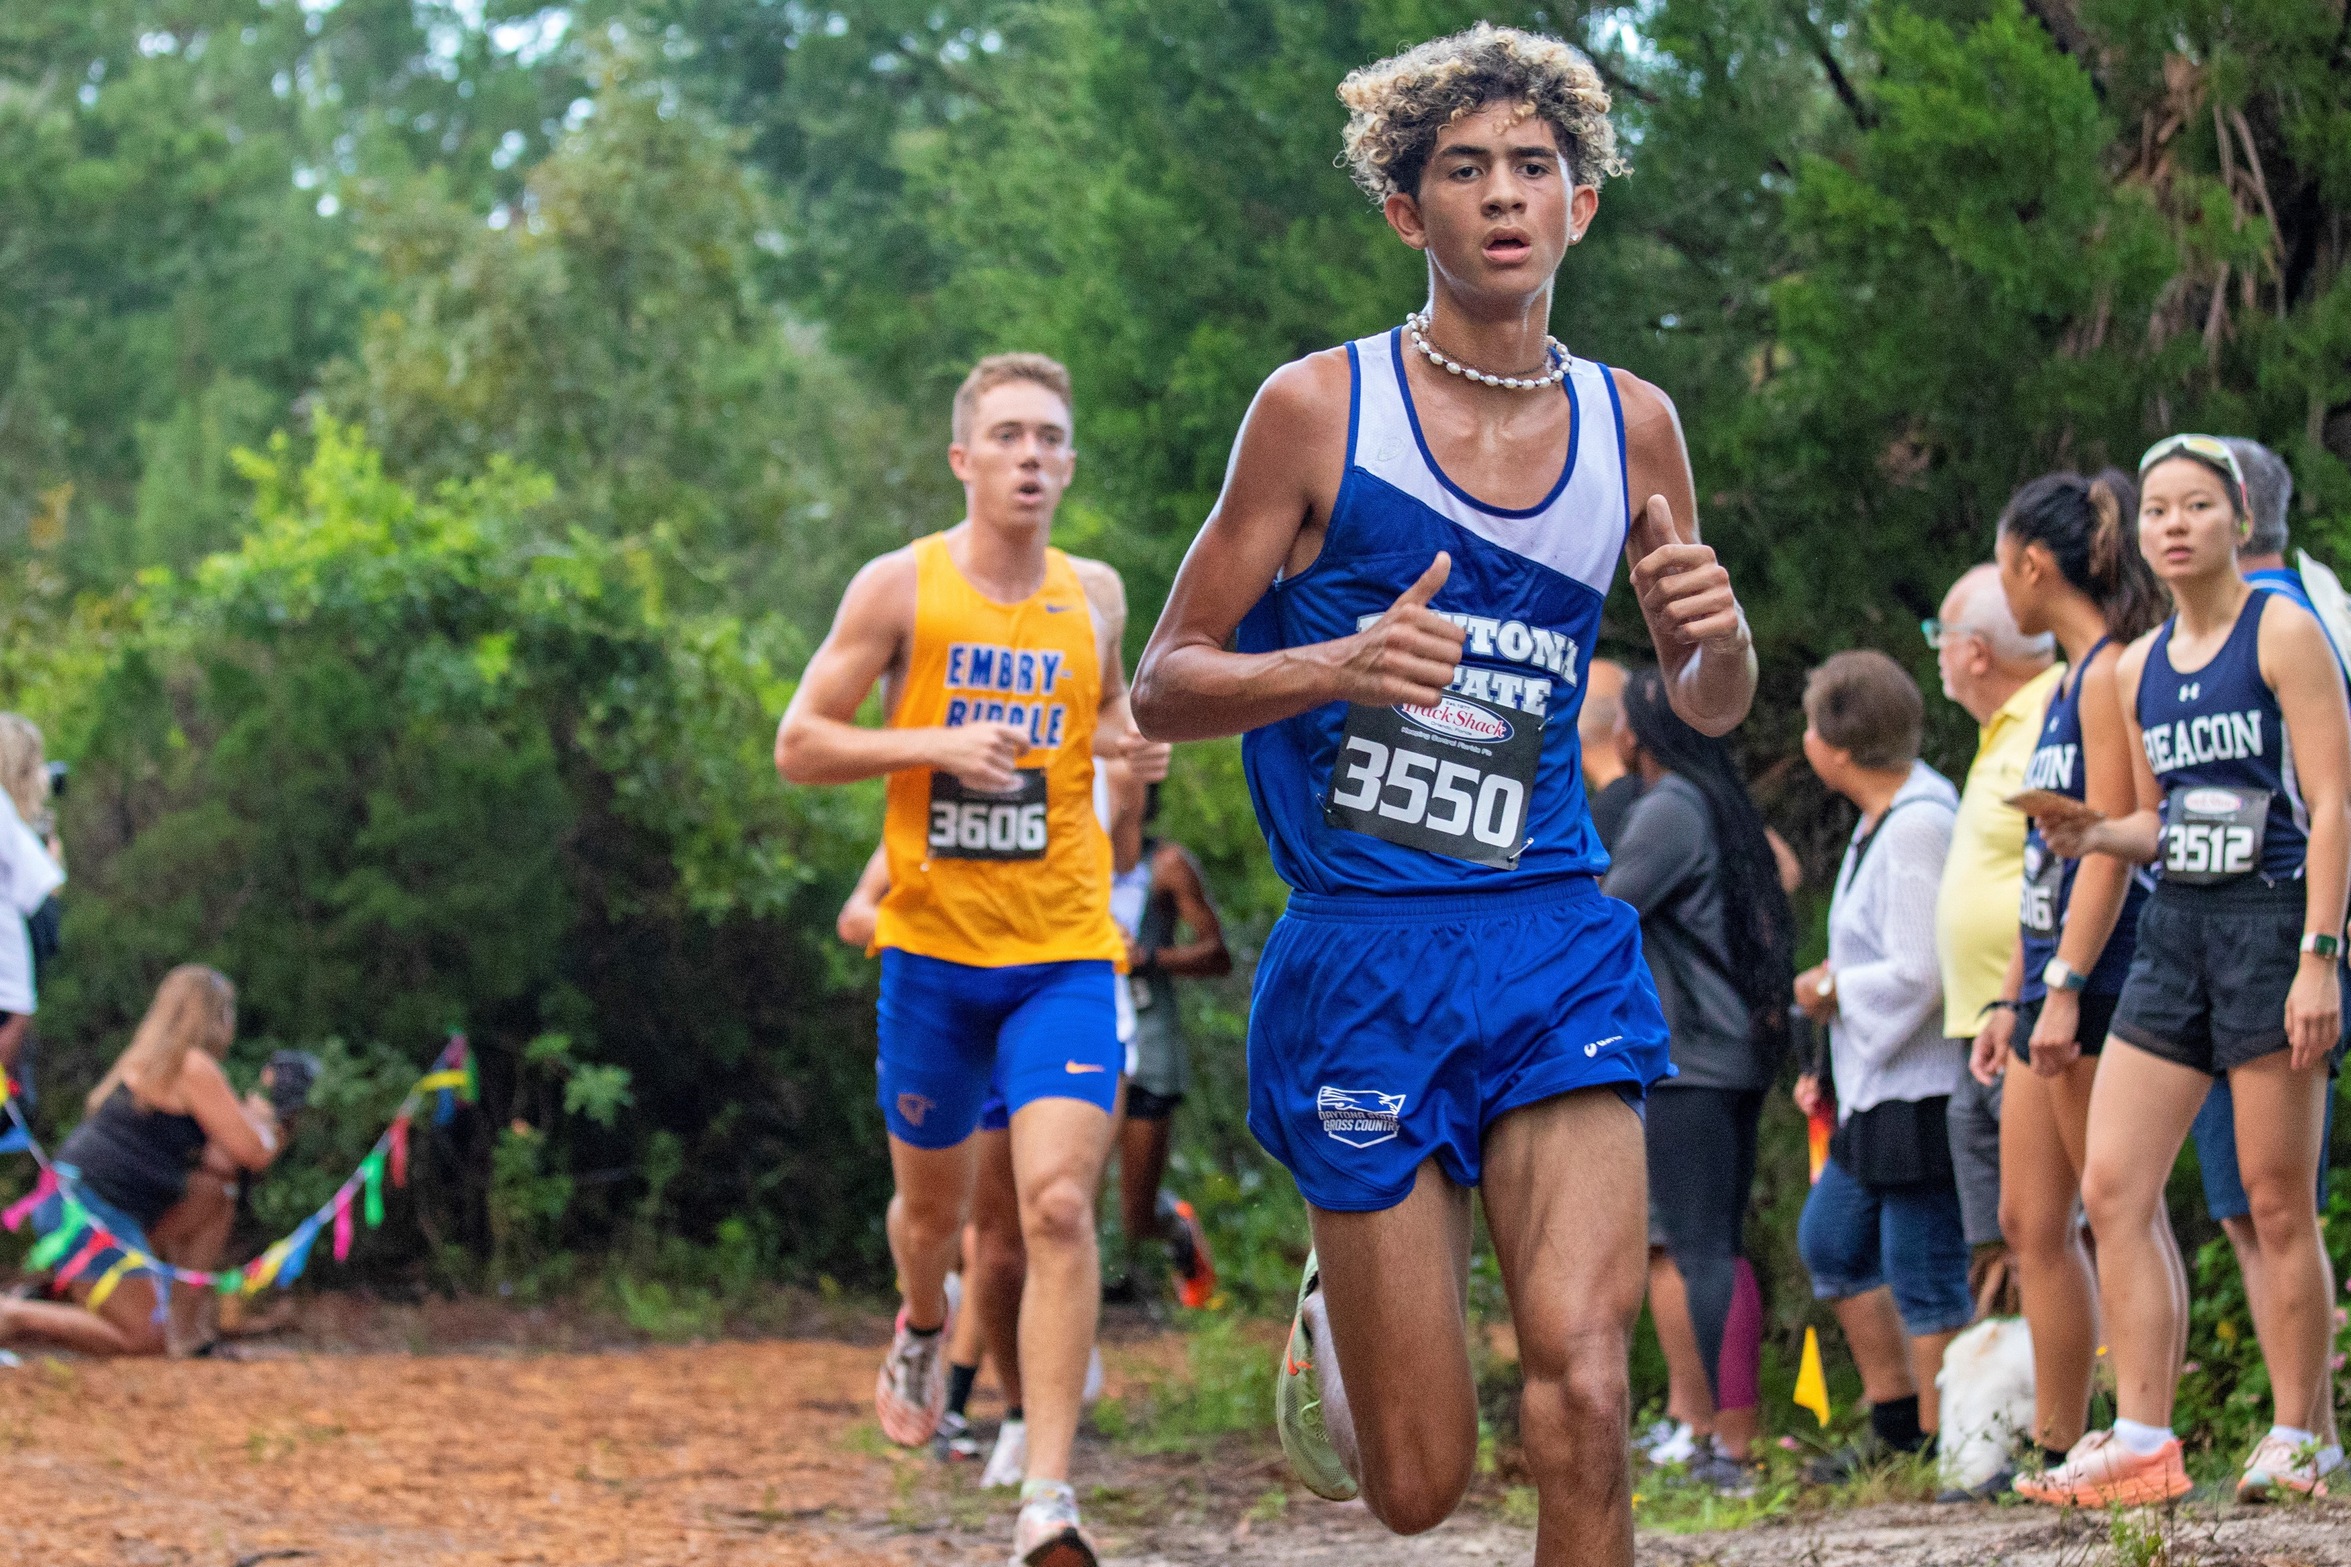 Julian Pomales at Embry Riddle Invitational